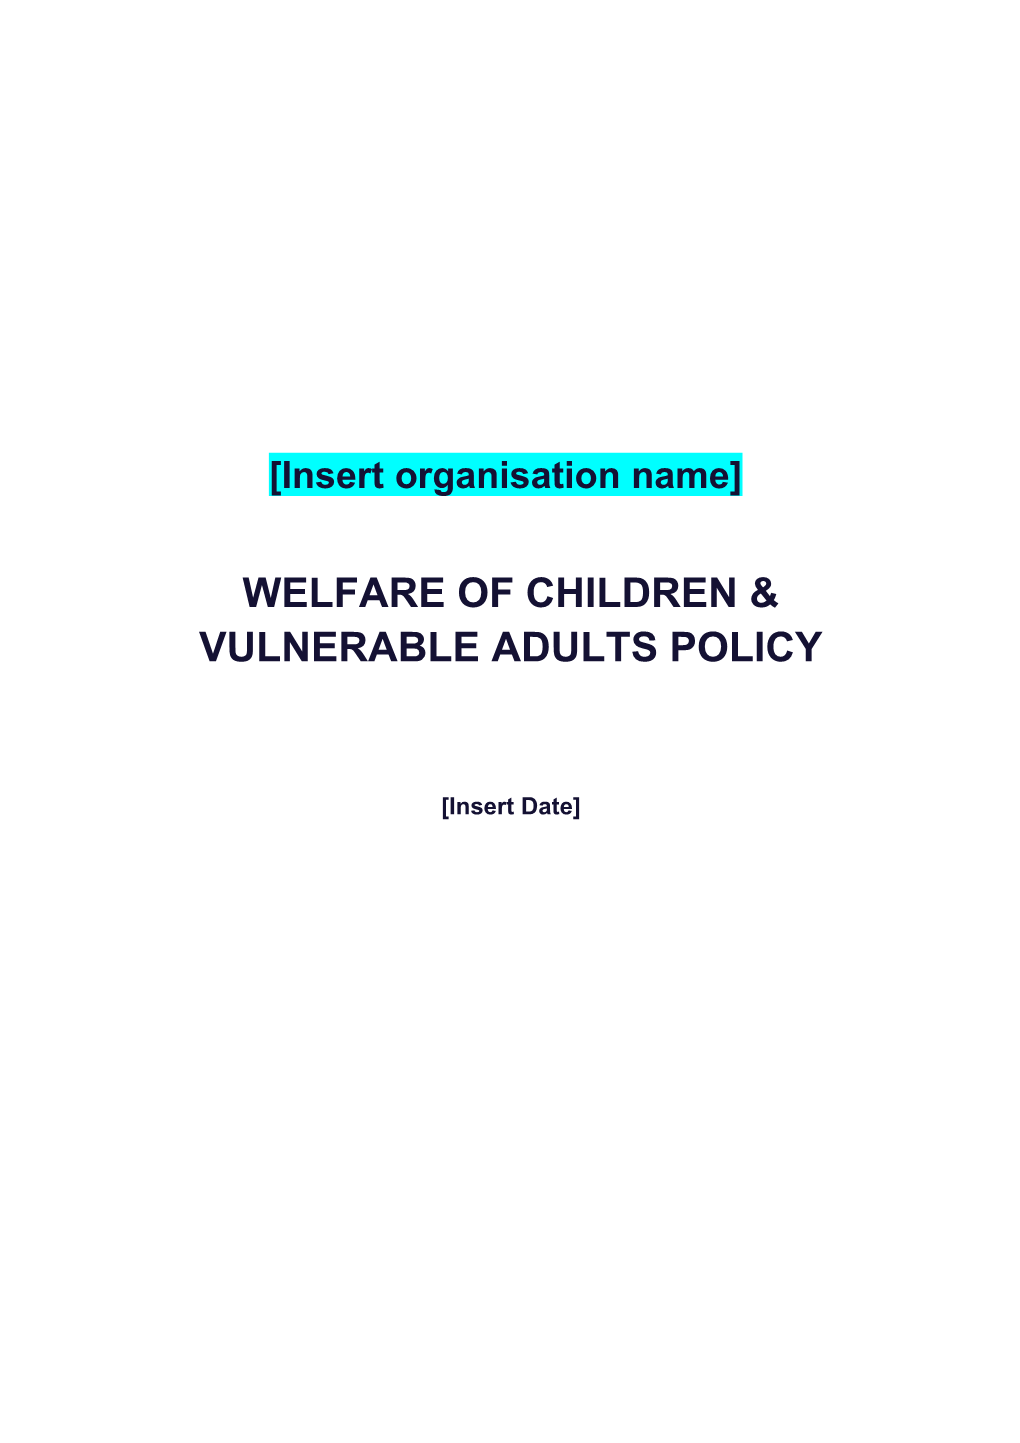 Welfare of Children & Vulnerable Adults Policy